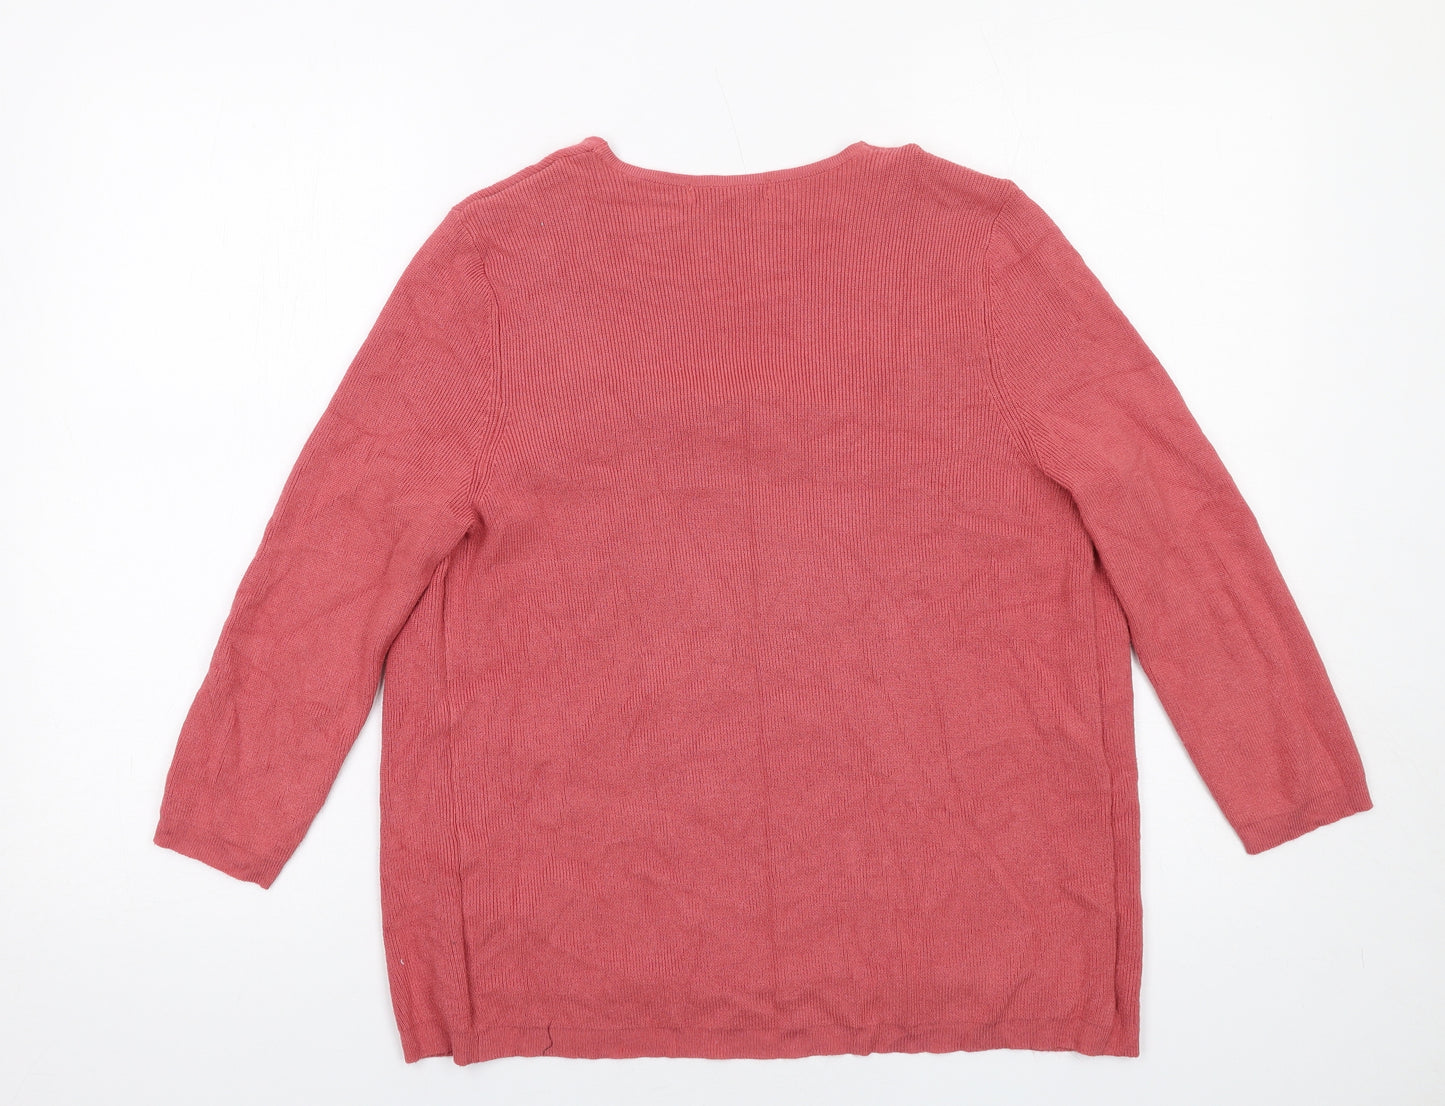 Marks and Spencer Womens Pink Round Neck Viscose Pullover Jumper Size 12 Pullover - Cardigan Top Lace Detail